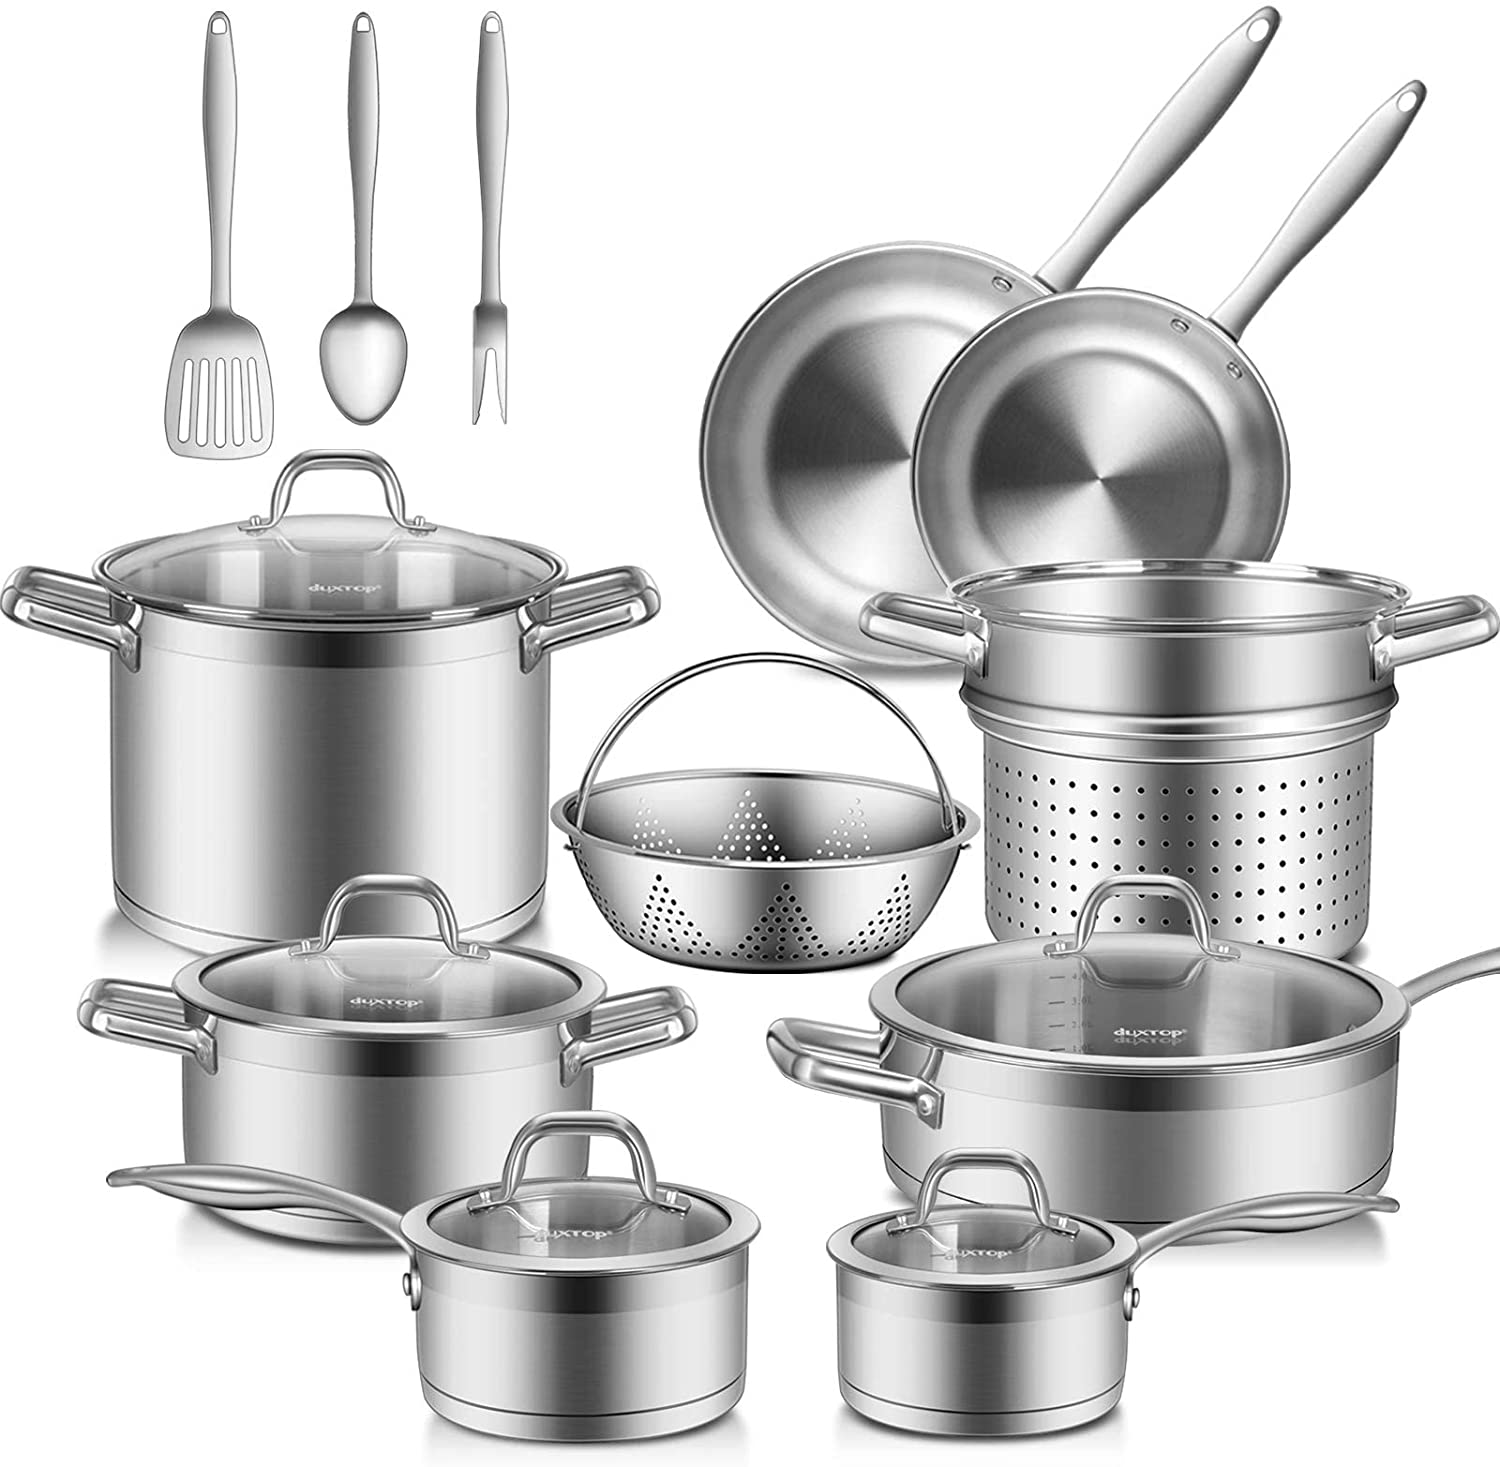 Duxtop-Professional-17-piece-Stainless-Steel-Induction-Cookware-Set-with-Excellent-Heat-Distribution